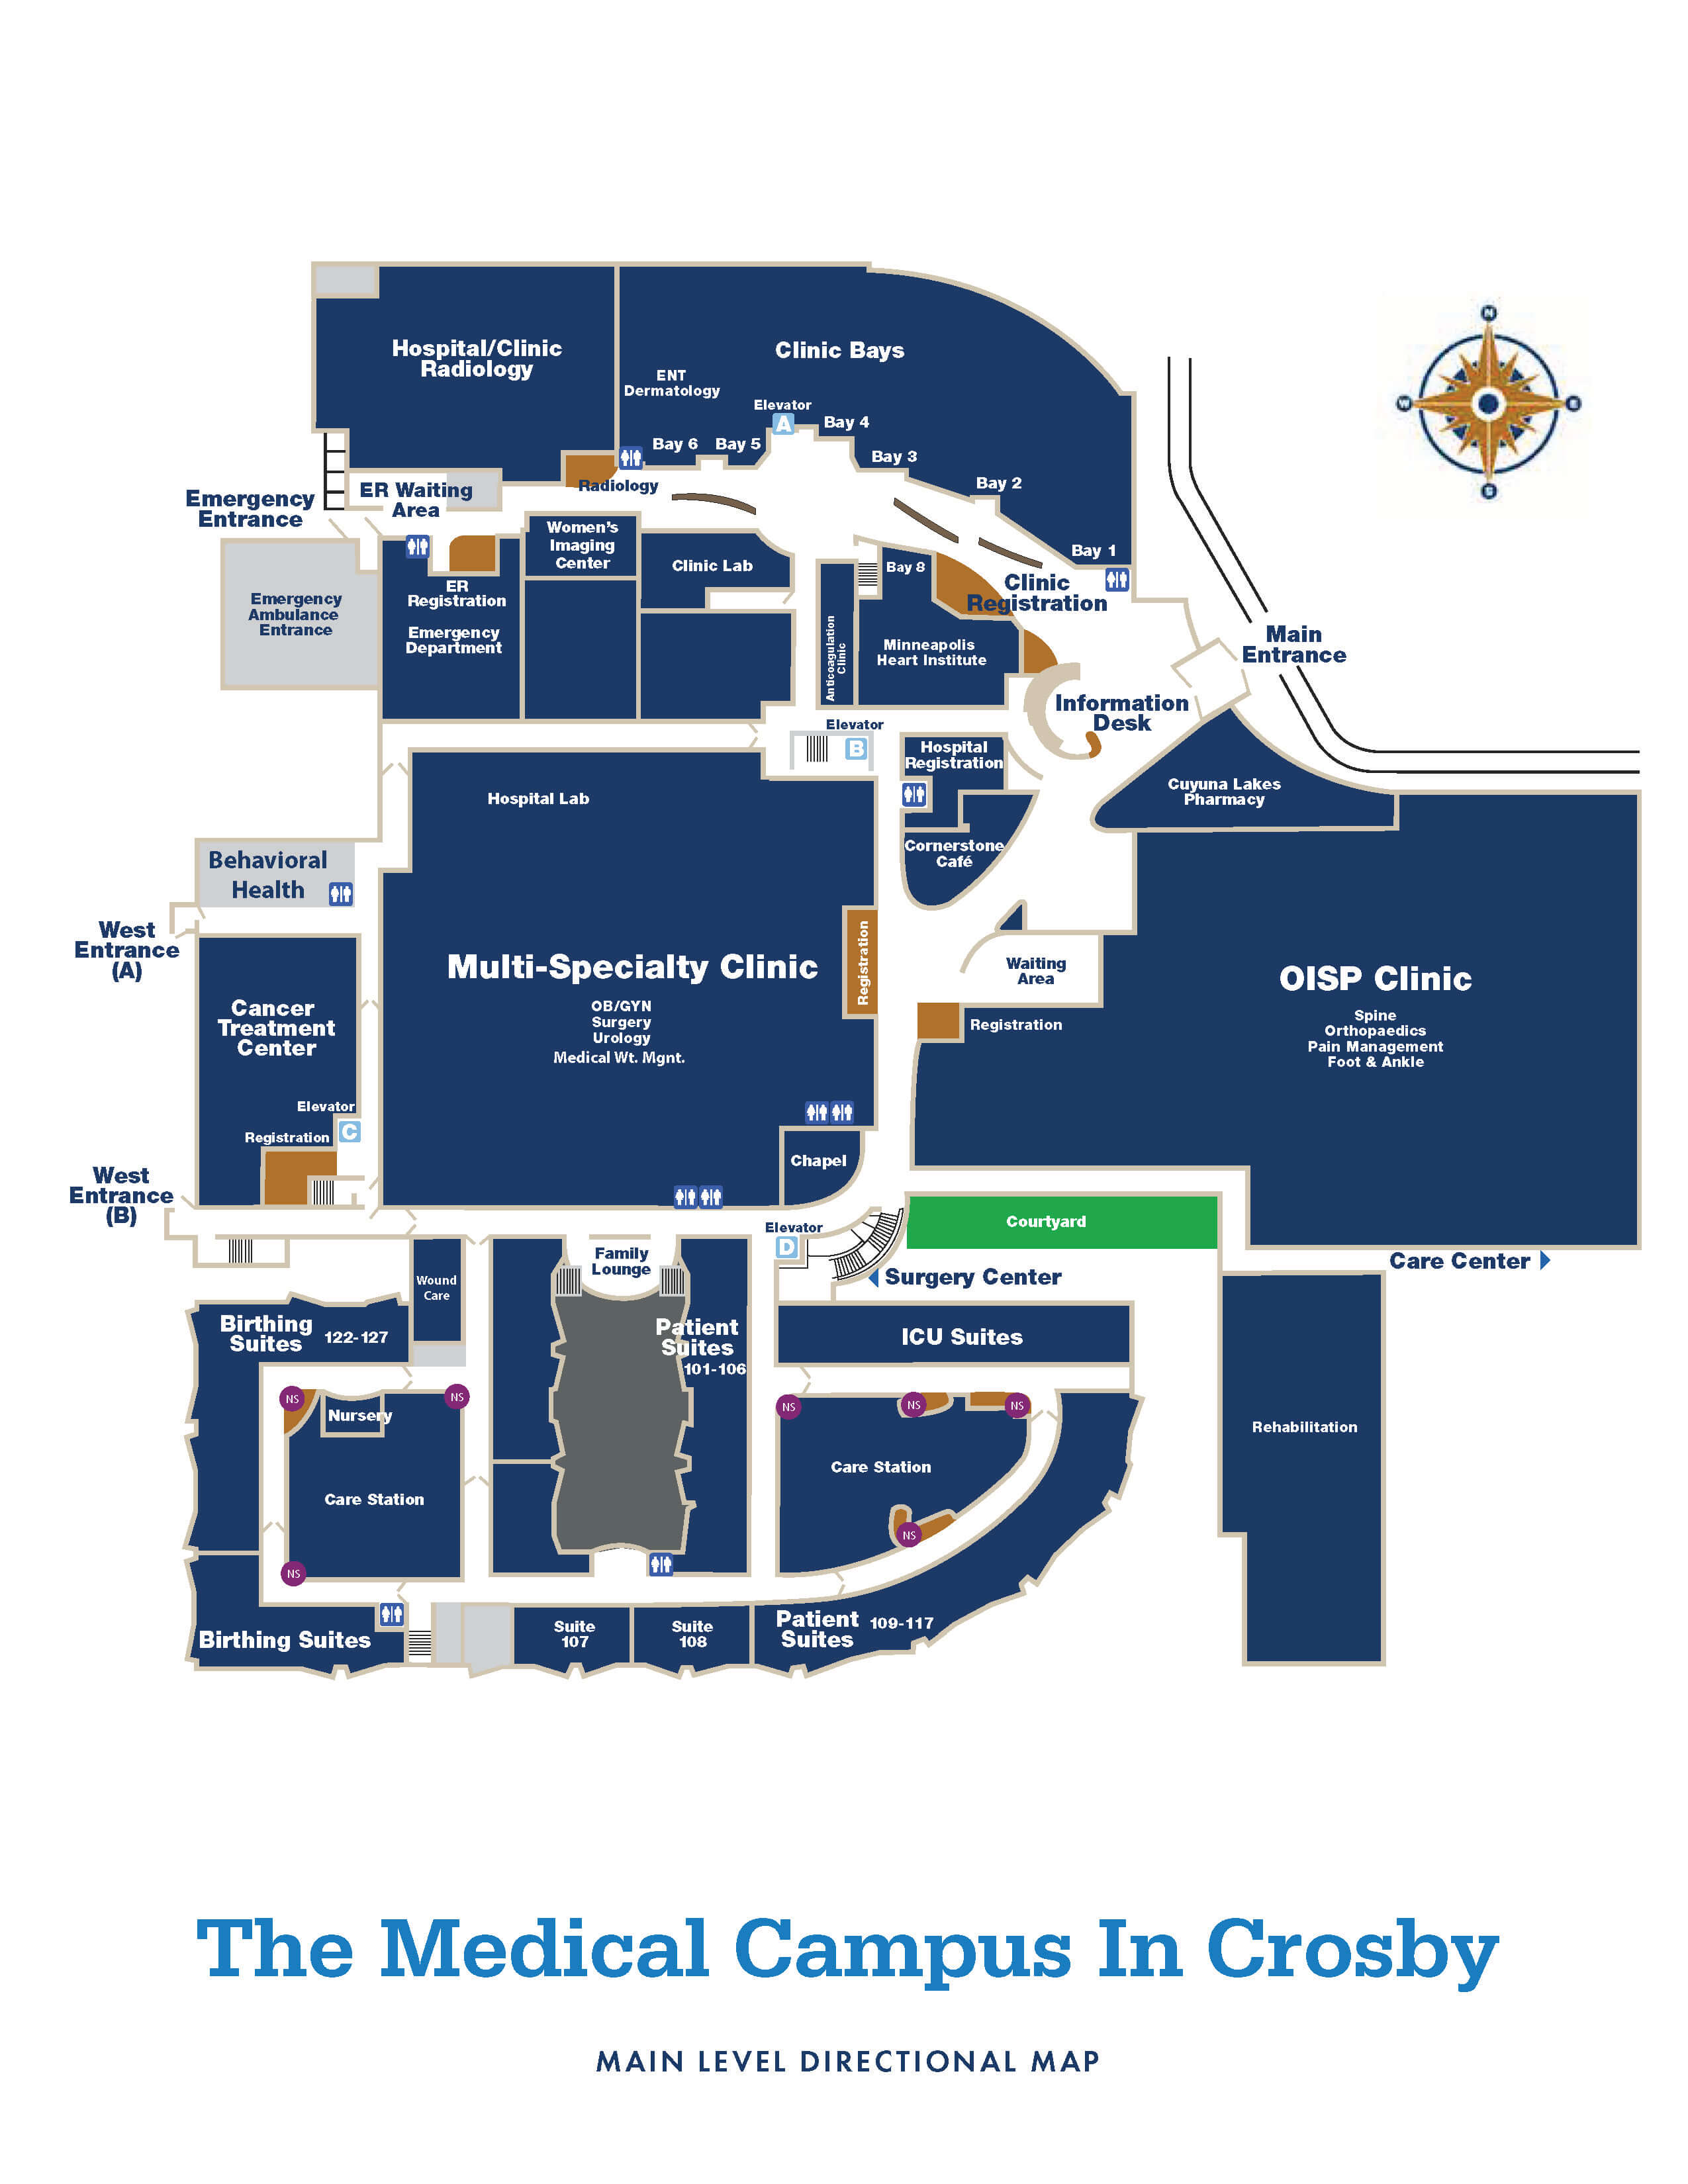 CRMC Directional Map of Main Level